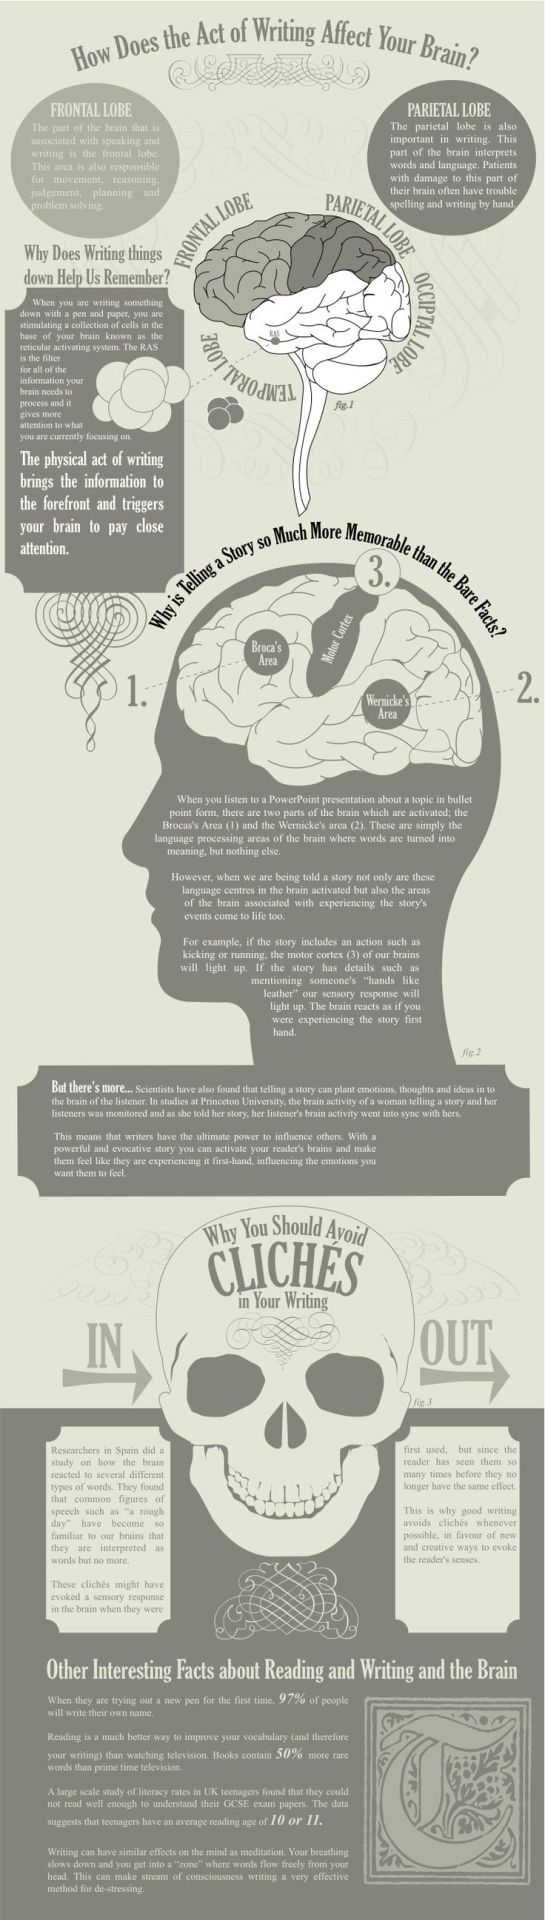 weareteachers:
“From http://www.bestinfographics.co/amazing-facts-about-writing-and-the-brain-infographic/
”